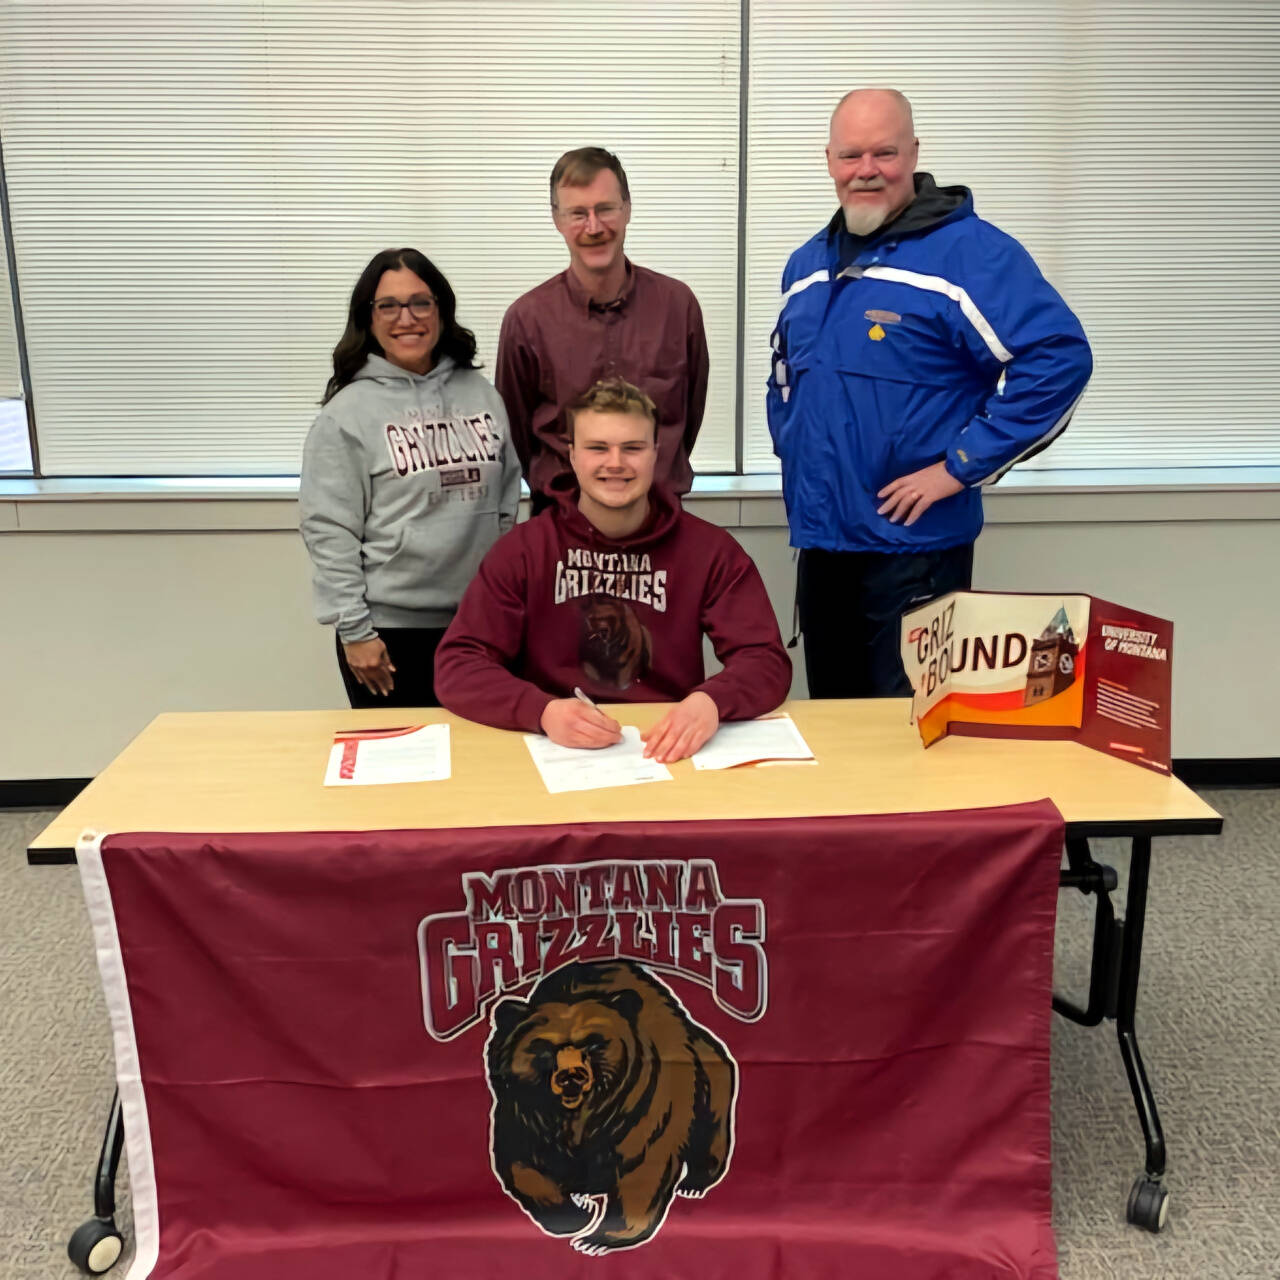 SUBMITTED PHOTO Aberdeen High School track and field star Tyler Bates, sitting, is surrounded by (from left) Bobcats head coach Desiree Glanz, father Todd Bates, and Aberdeen throwing coach Todd Bridge after signing a National Letter of Intent to attend the University of Montana in the fall on Wednesday in Aberdeen.